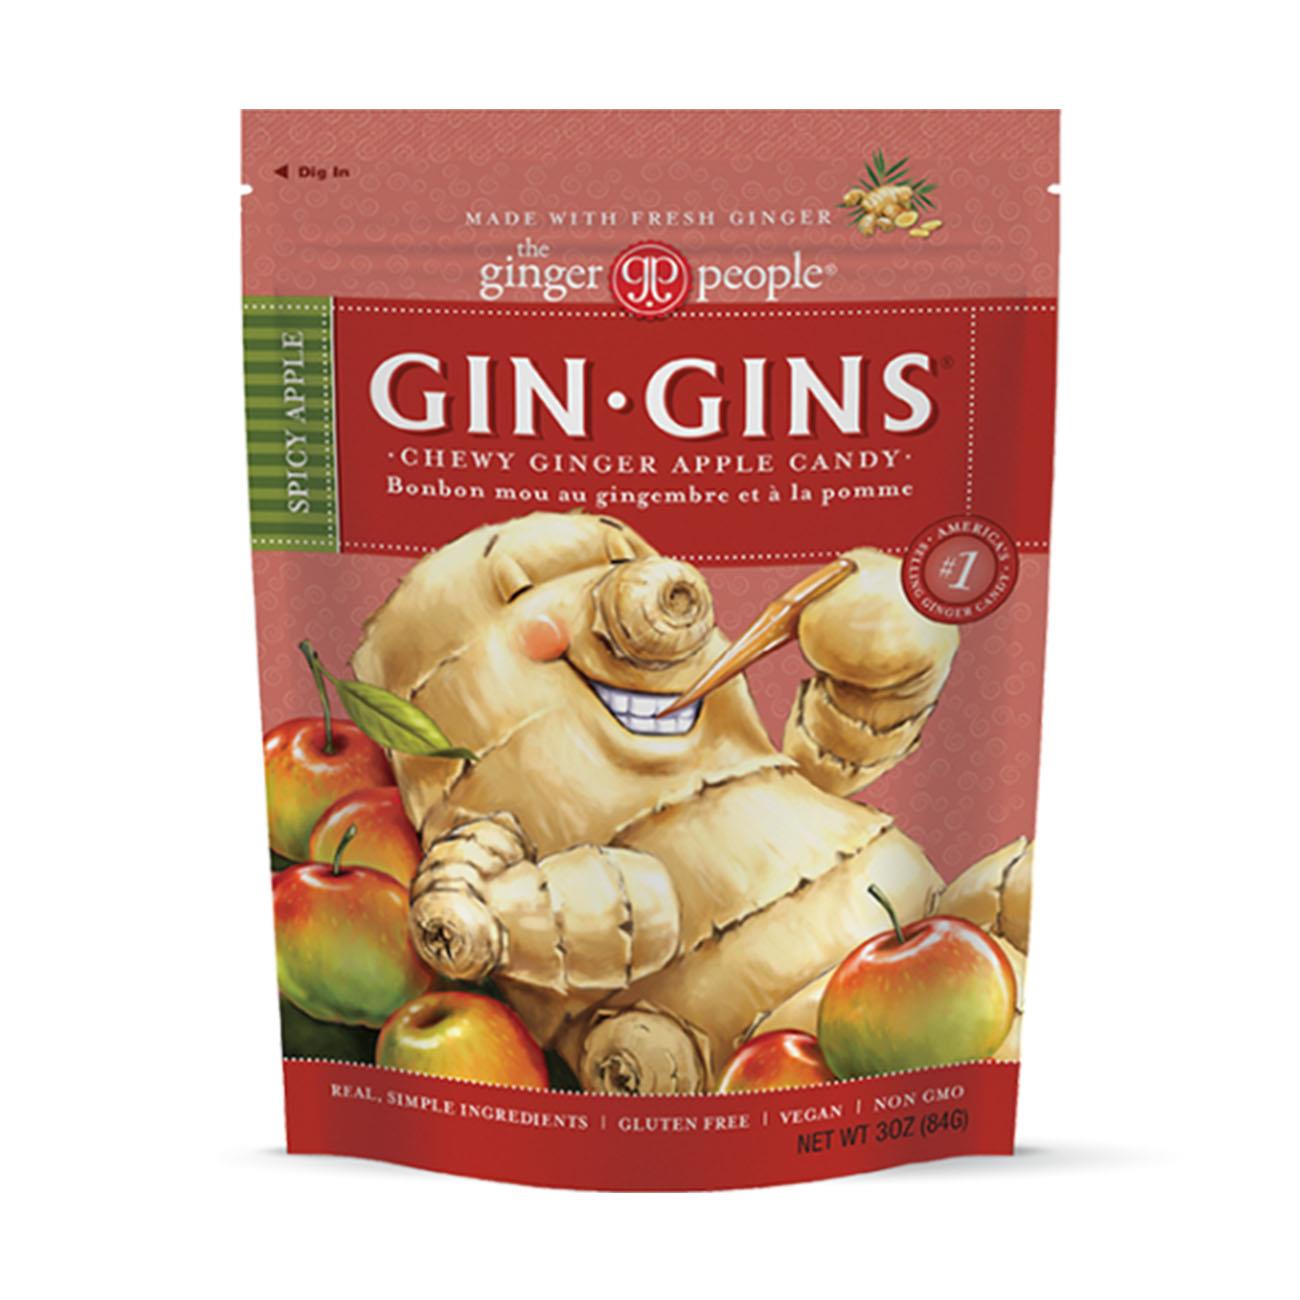 Gin Gins Spicy Apple Ginger Chews 84g